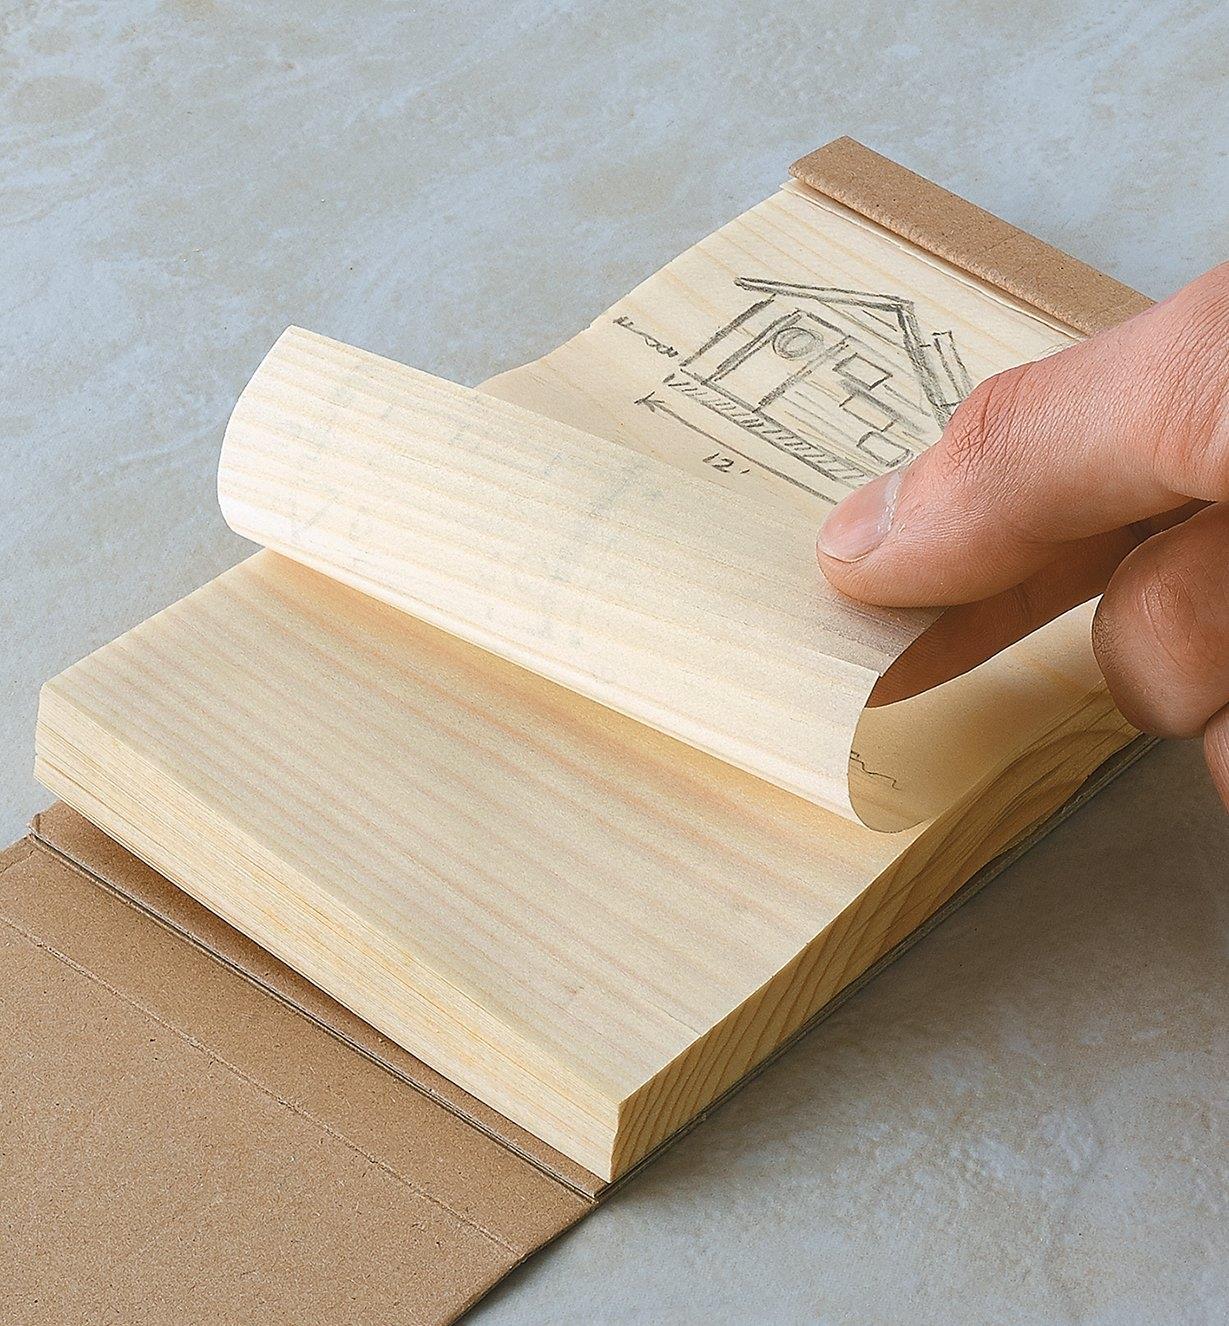 Flipping through the pages of the 3" x 4" Wooden Kyougi Notepad